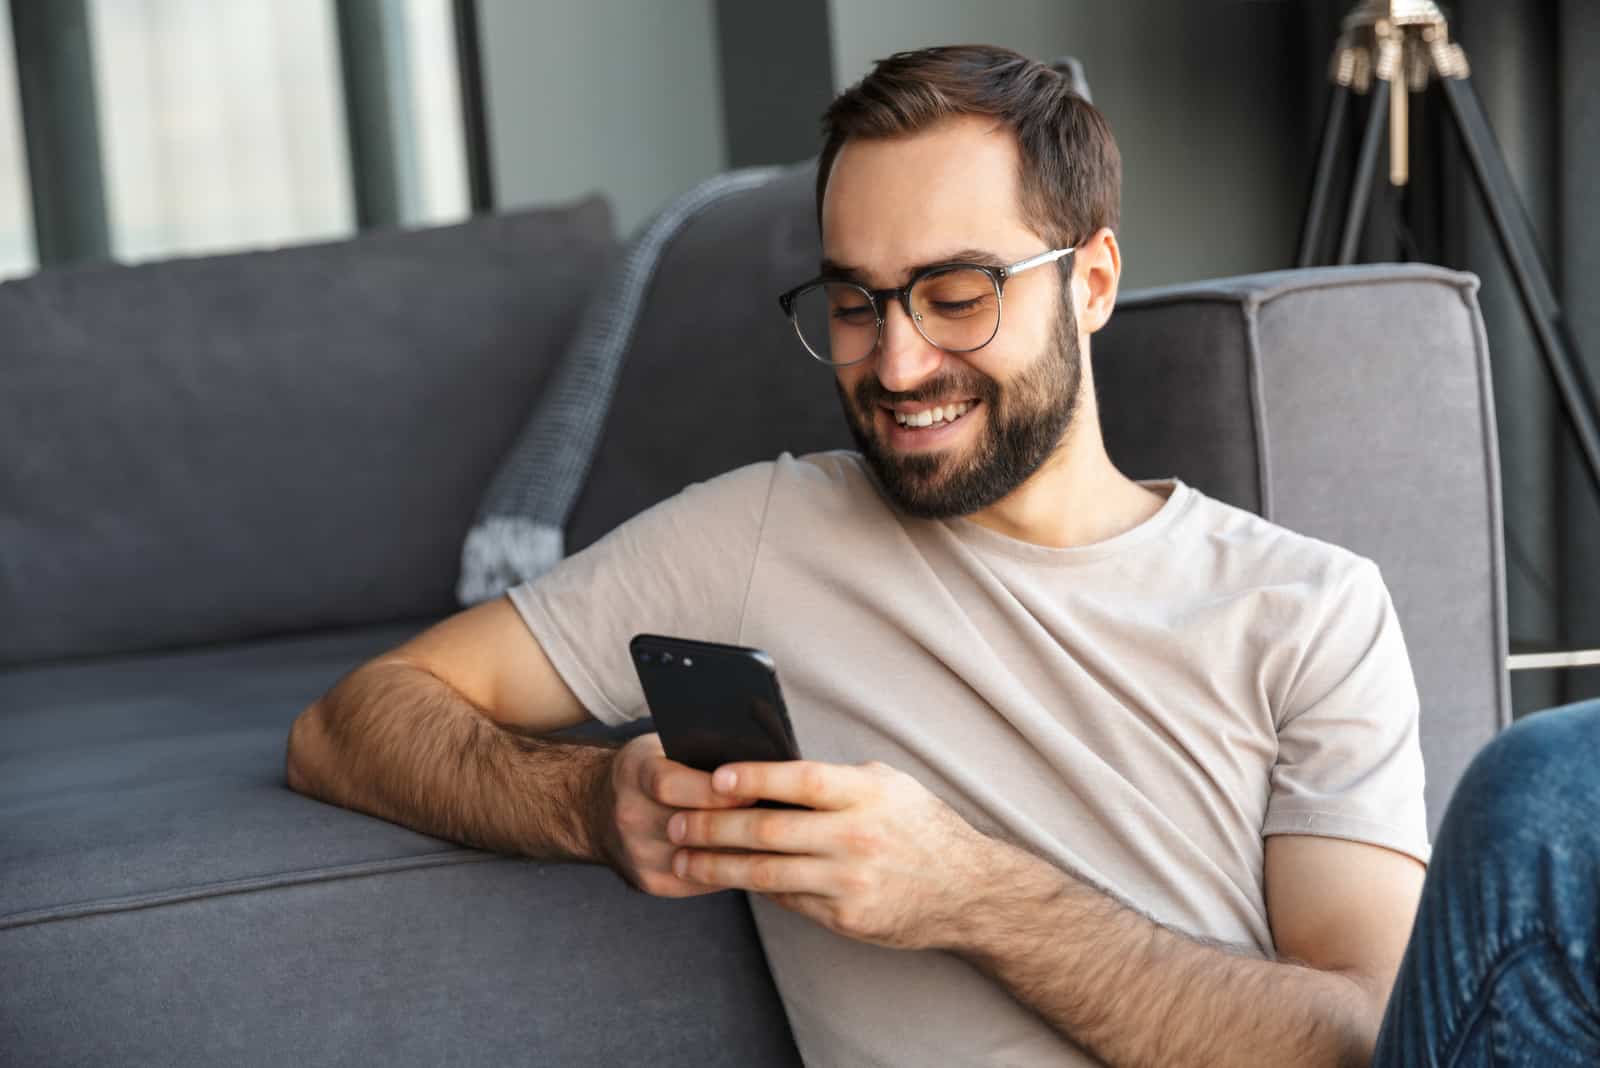 a smiling man sits leaning against the couch and keys on the phone